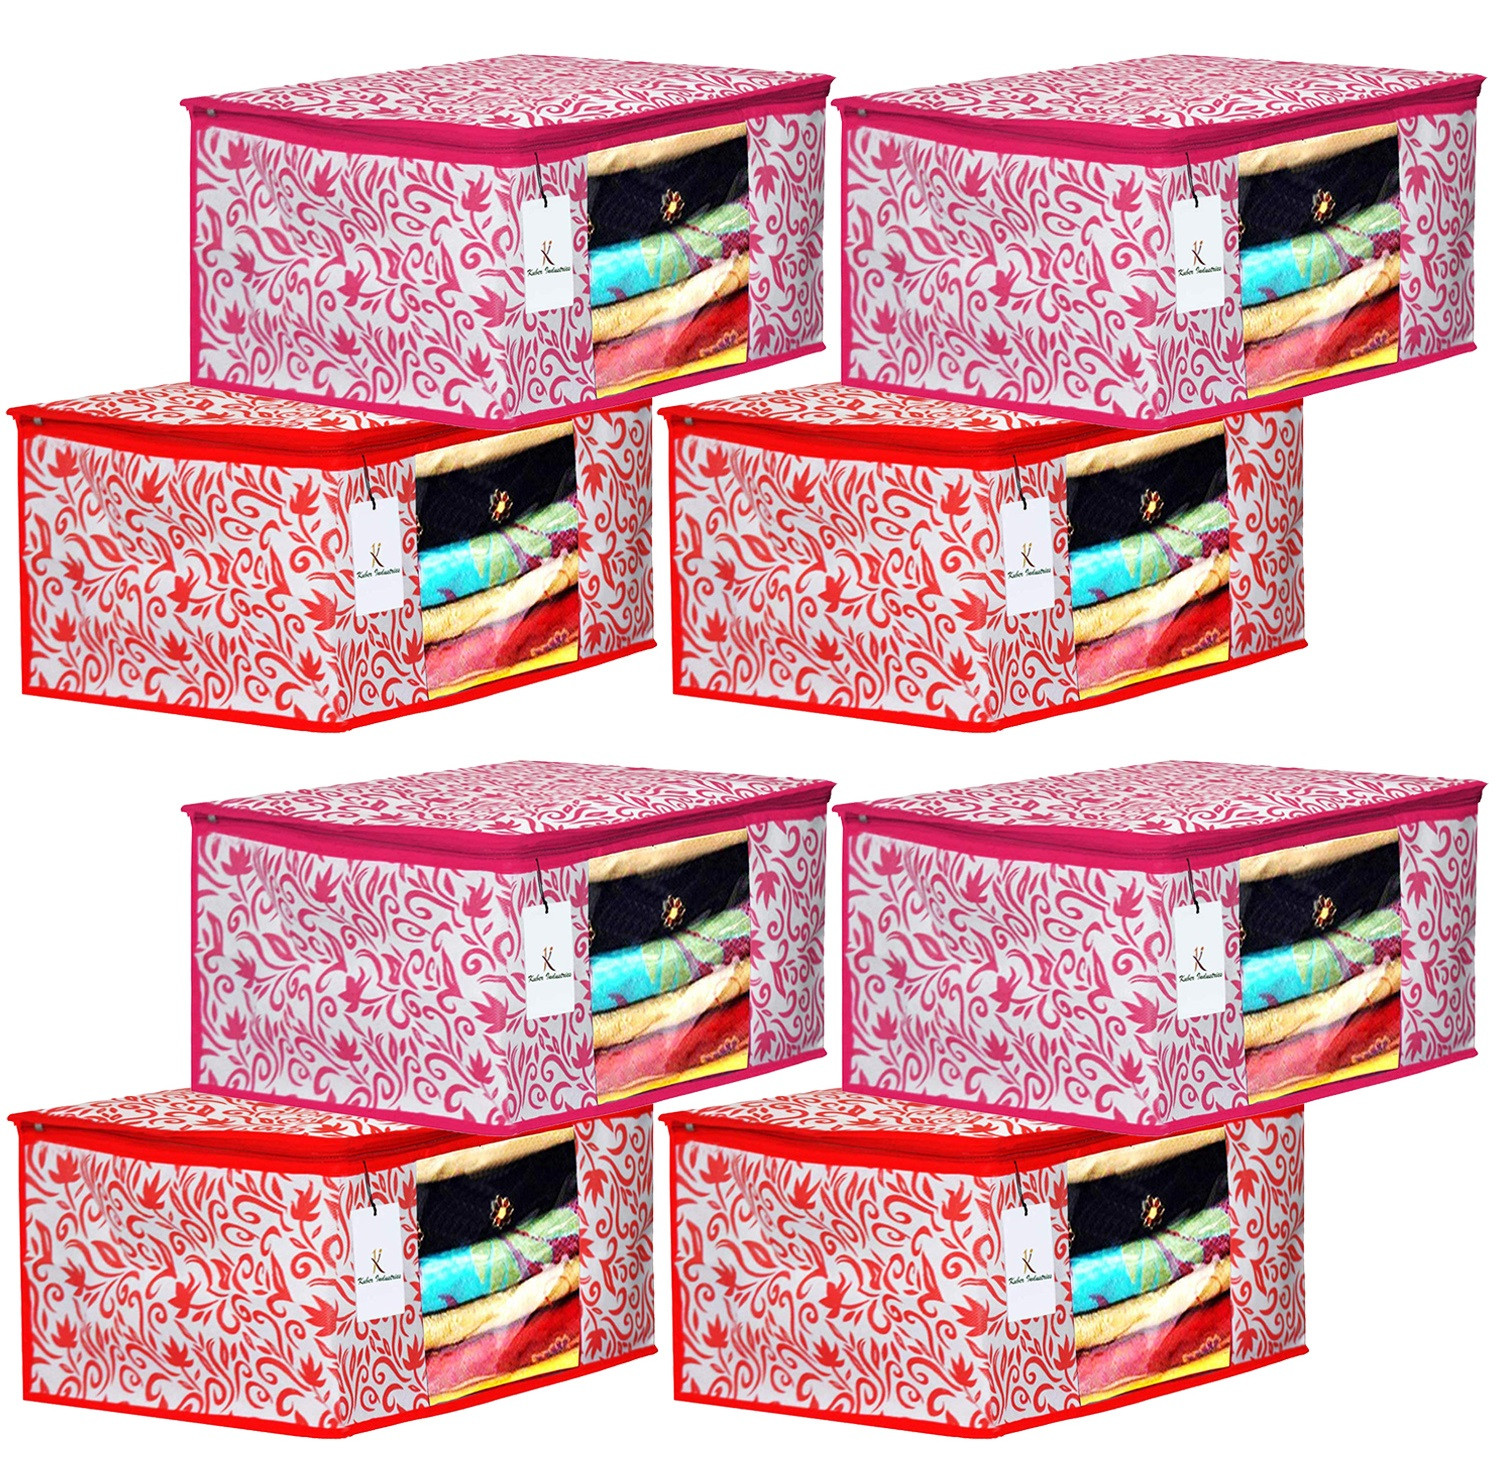 Kuber Industries Leaf Design Non Woven Fabric Saree Cover Set with Transparent Window, Extra Large, Red & Pink -CTKTC40765